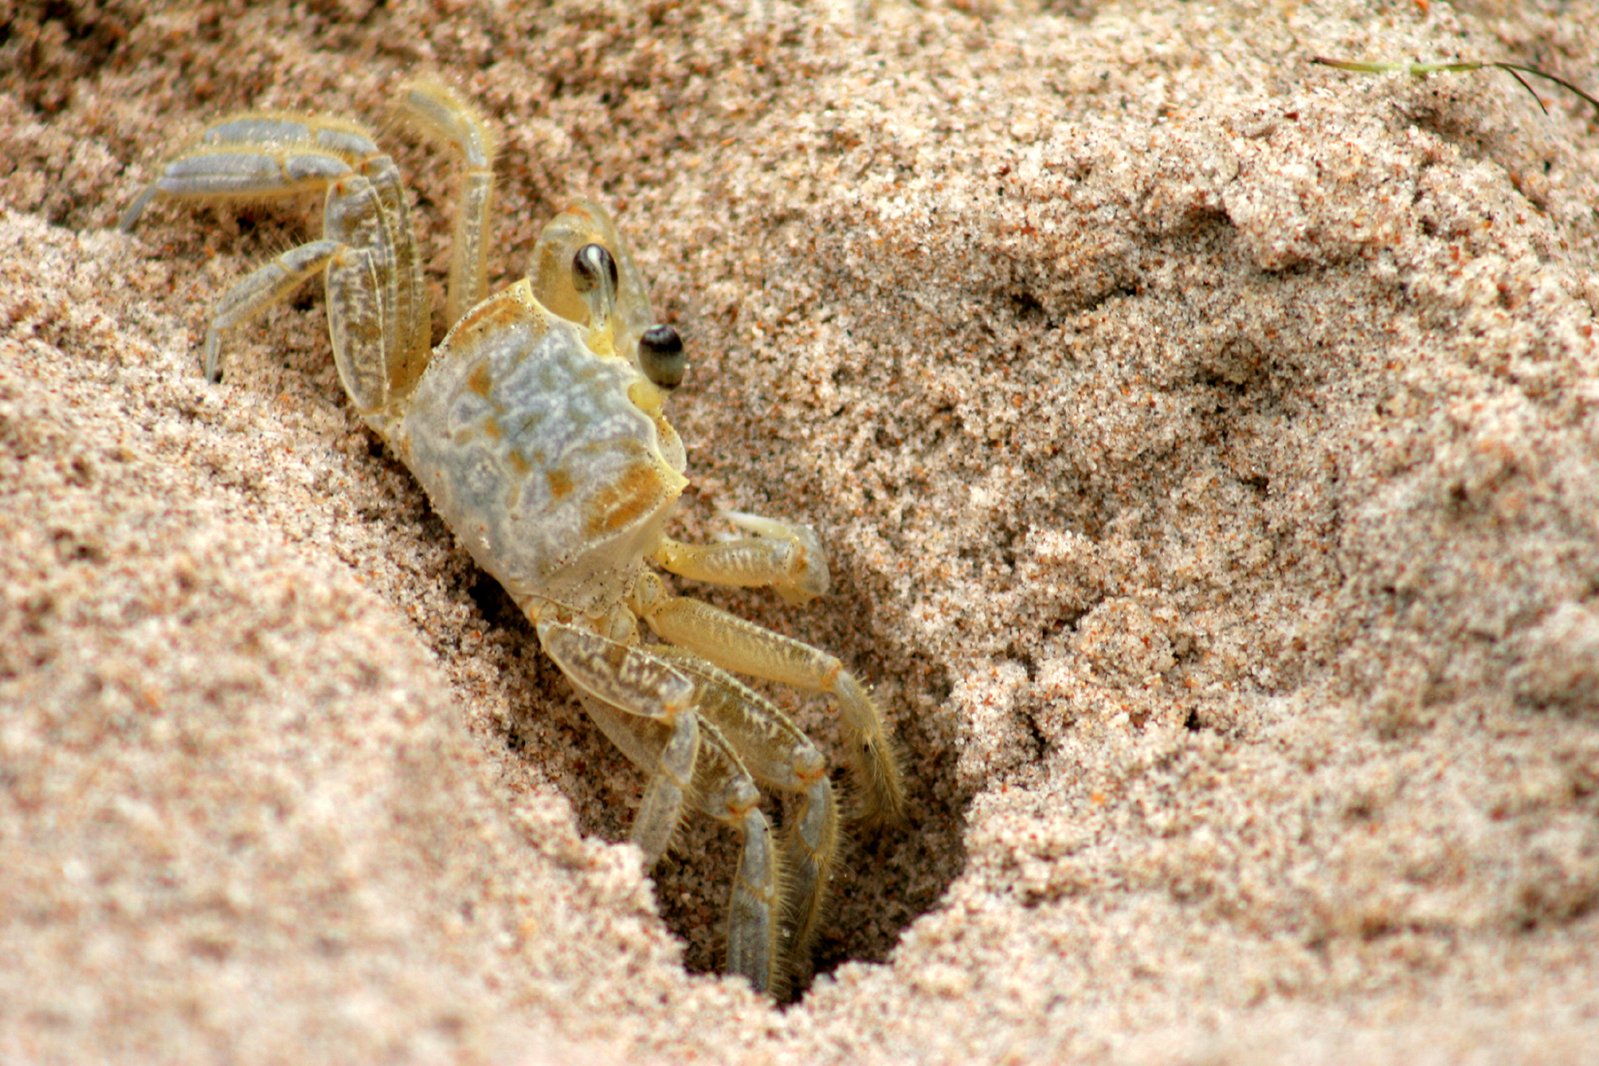 a small crab crawling out of the sand